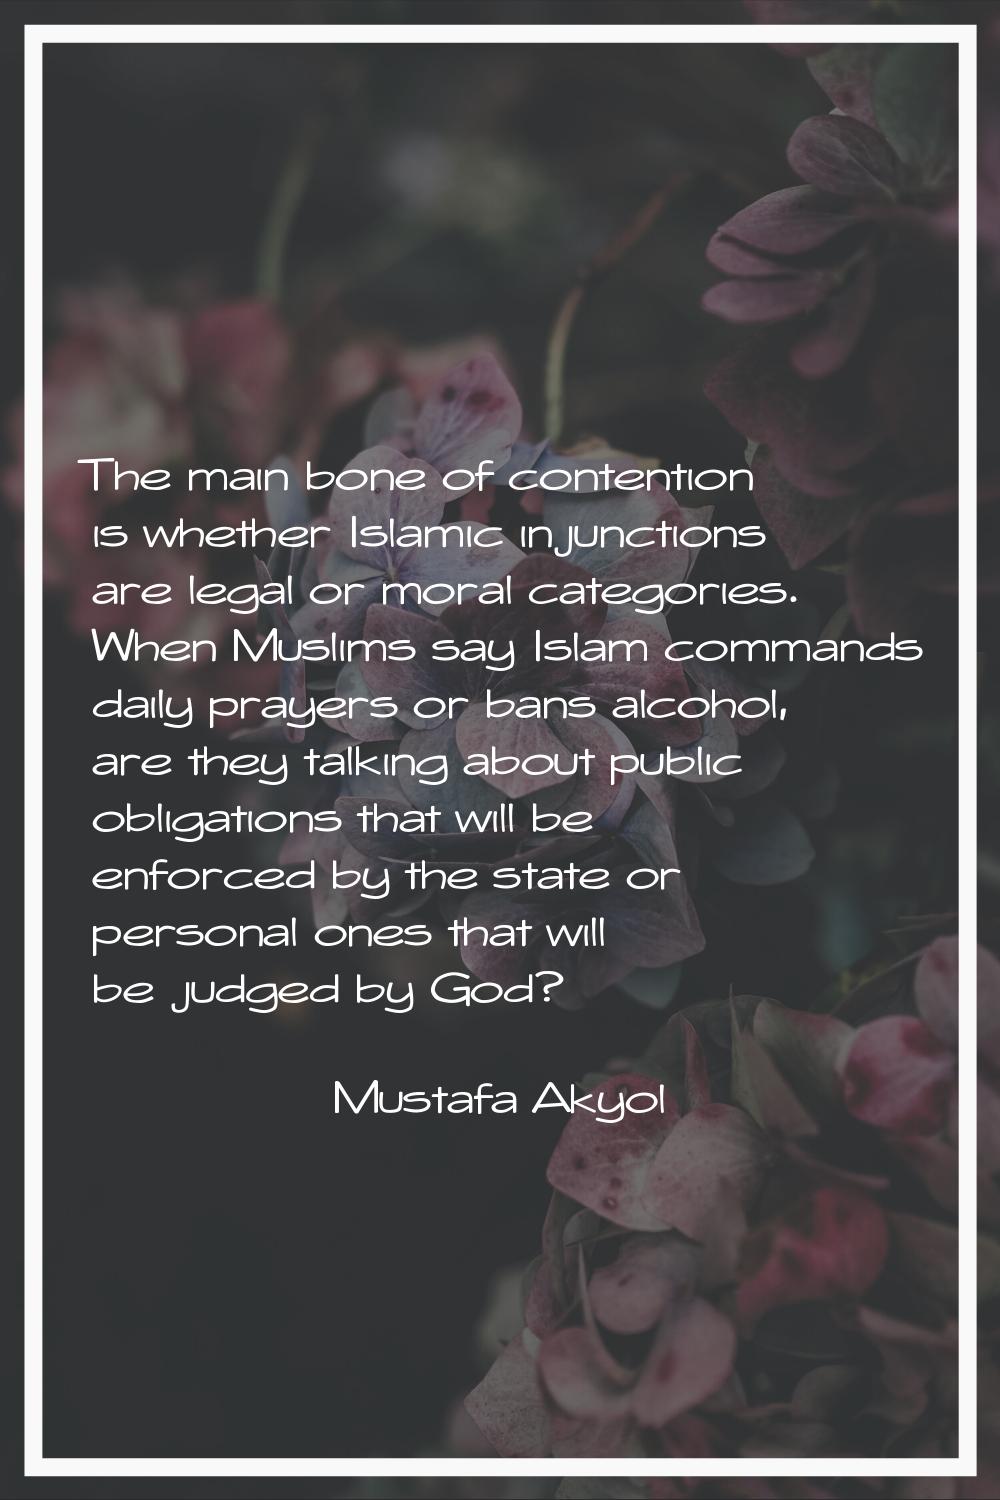 The main bone of contention is whether Islamic injunctions are legal or moral categories. When Musl